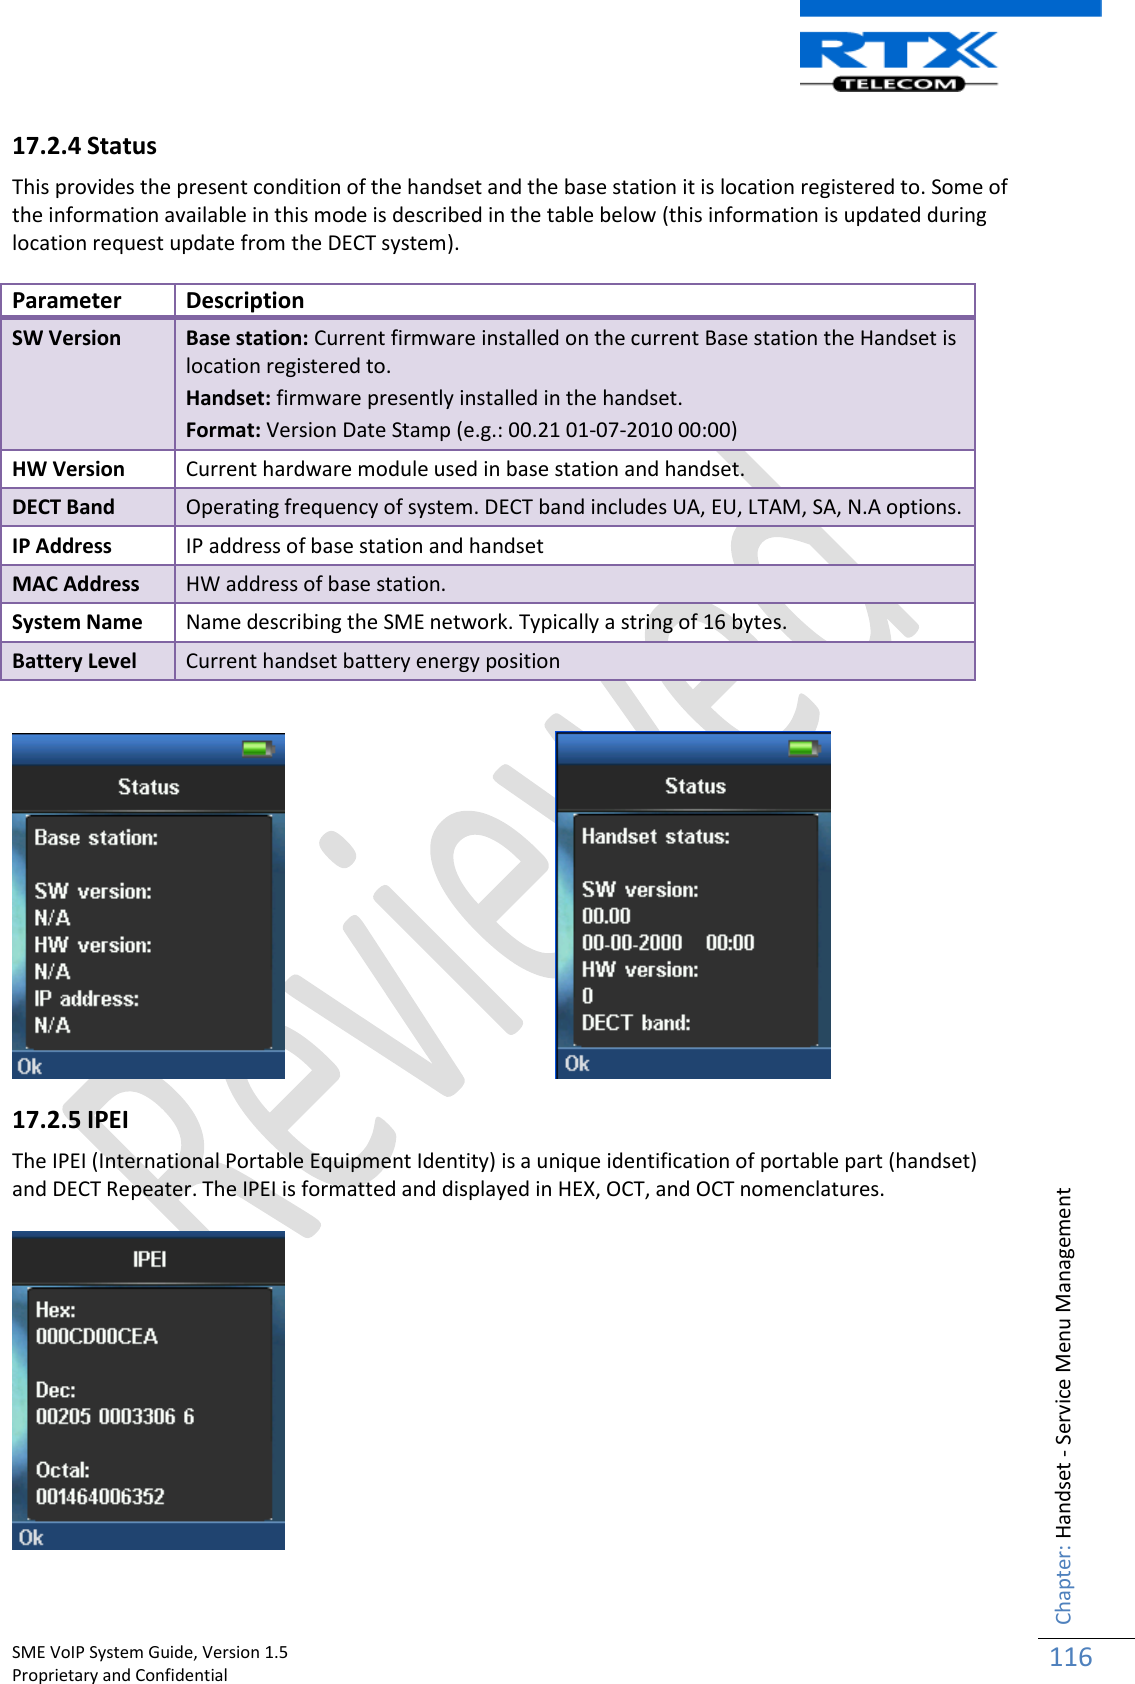    SME VoIP System Guide, Version 1.5                                                                                                                                                          Proprietary and Confidential    Chapter: Handset - Service Menu Management 116  17.2.4 Status This provides the present condition of the handset and the base station it is location registered to. Some of the information available in this mode is described in the table below (this information is updated during location request update from the DECT system).   Parameter Description SW Version Base station: Current firmware installed on the current Base station the Handset is location registered to. Handset: firmware presently installed in the handset. Format: Version Date Stamp (e.g.: 00.21 01-07-2010 00:00) HW Version Current hardware module used in base station and handset. DECT Band Operating frequency of system. DECT band includes UA, EU, LTAM, SA, N.A options.  IP Address IP address of base station and handset MAC Address HW address of base station. System Name Name describing the SME network. Typically a string of 16 bytes. Battery Level Current handset battery energy position         17.2.5 IPEI The IPEI (International Portable Equipment Identity) is a unique identification of portable part (handset) and DECT Repeater. The IPEI is formatted and displayed in HEX, OCT, and OCT nomenclatures.      